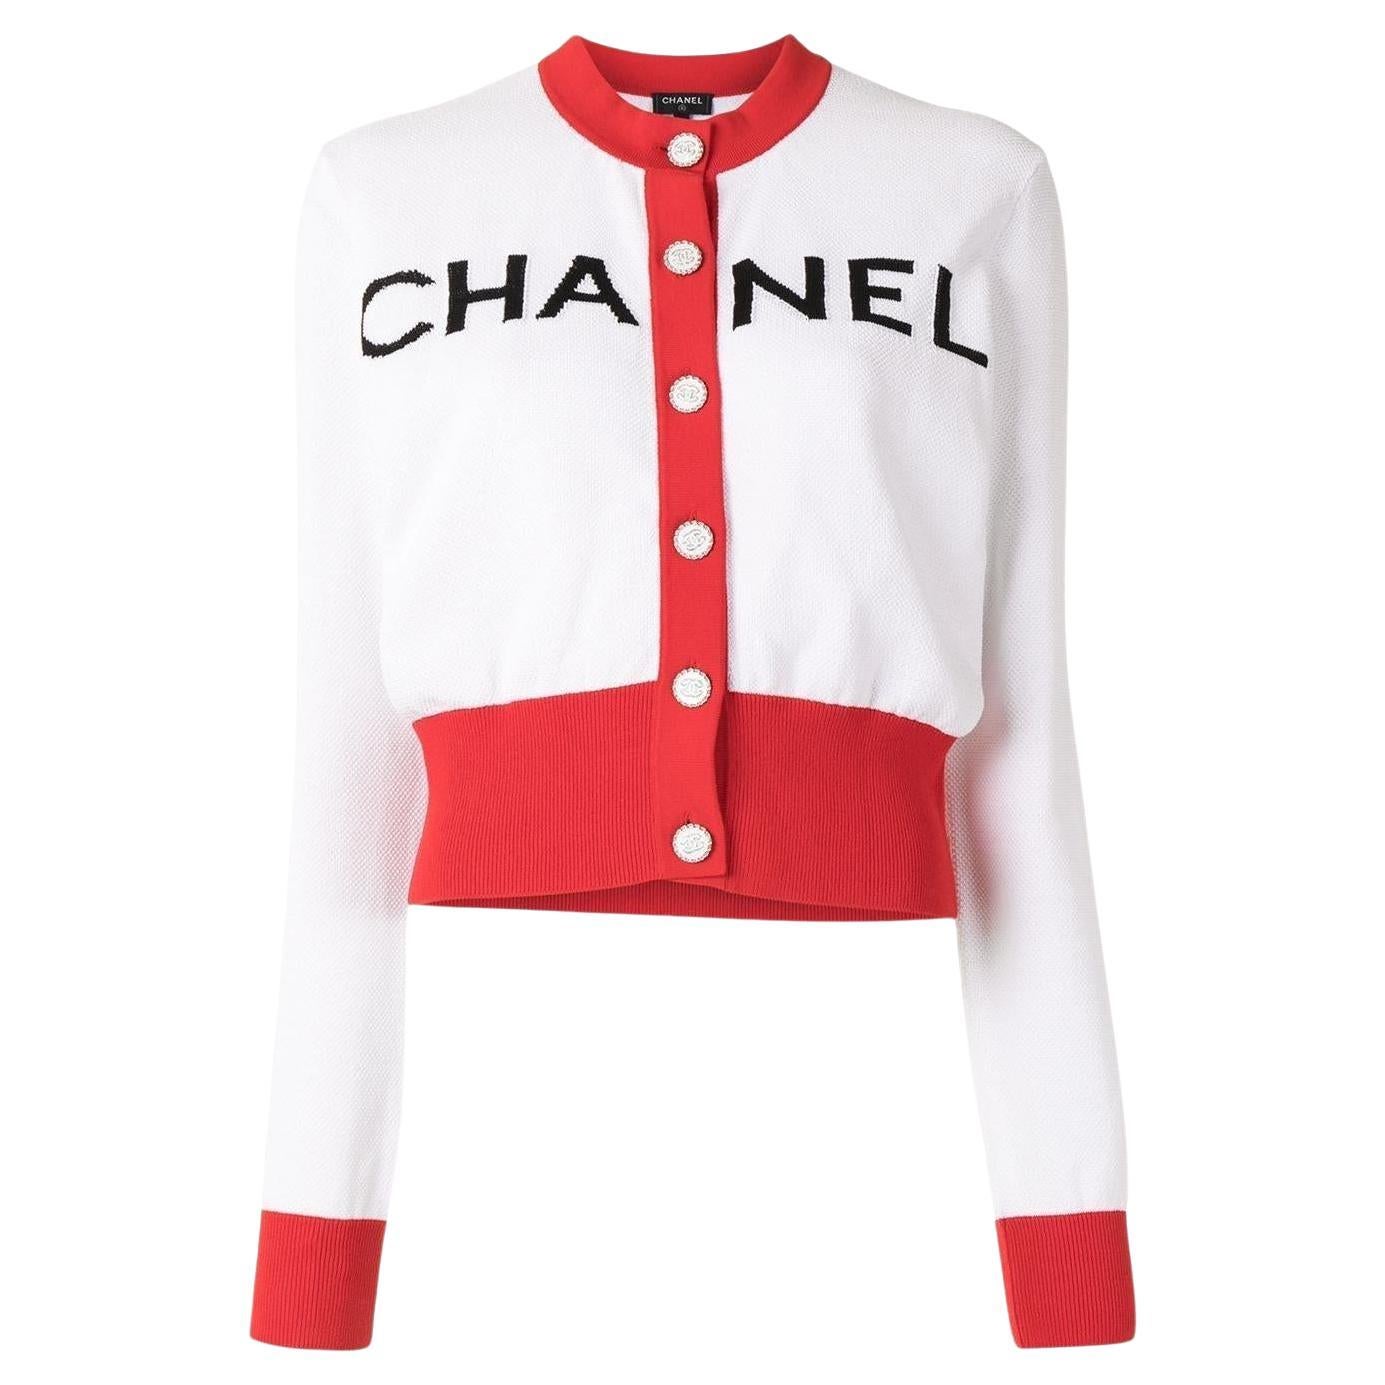 Chanel New Iconic 2019 Spring Logo Runway Cardigan For Sale